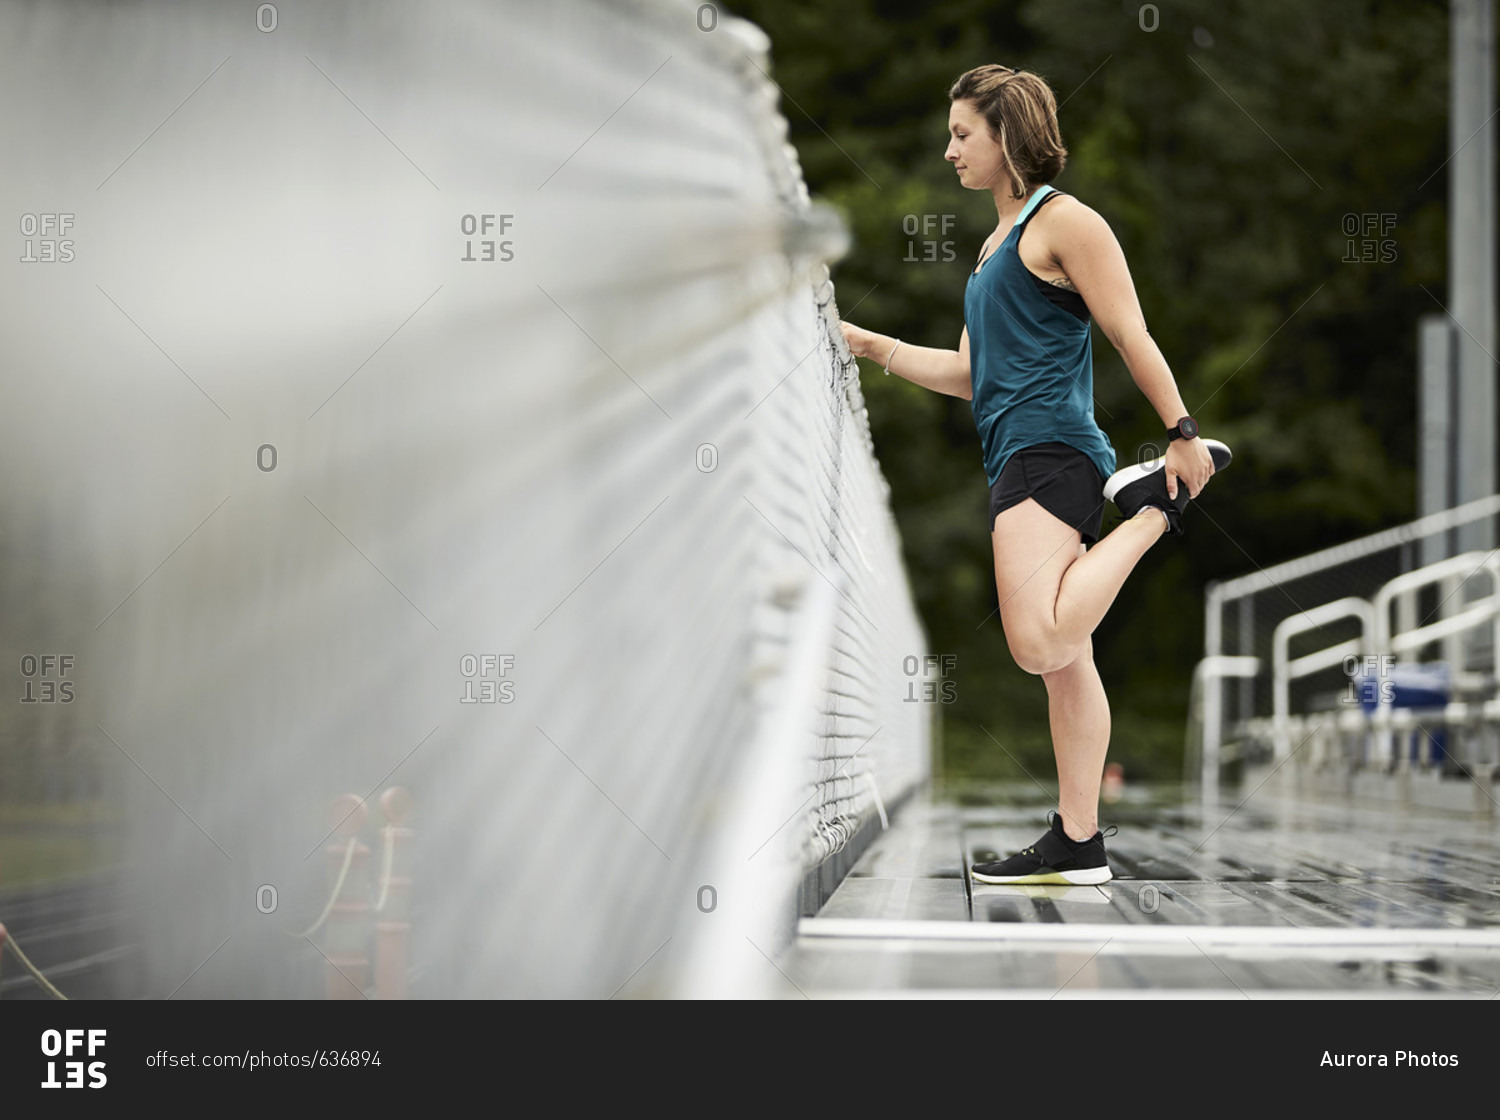 Side view of female athlete doing quadriceps muscle stretches, Lincoln, Massachusetts, USA